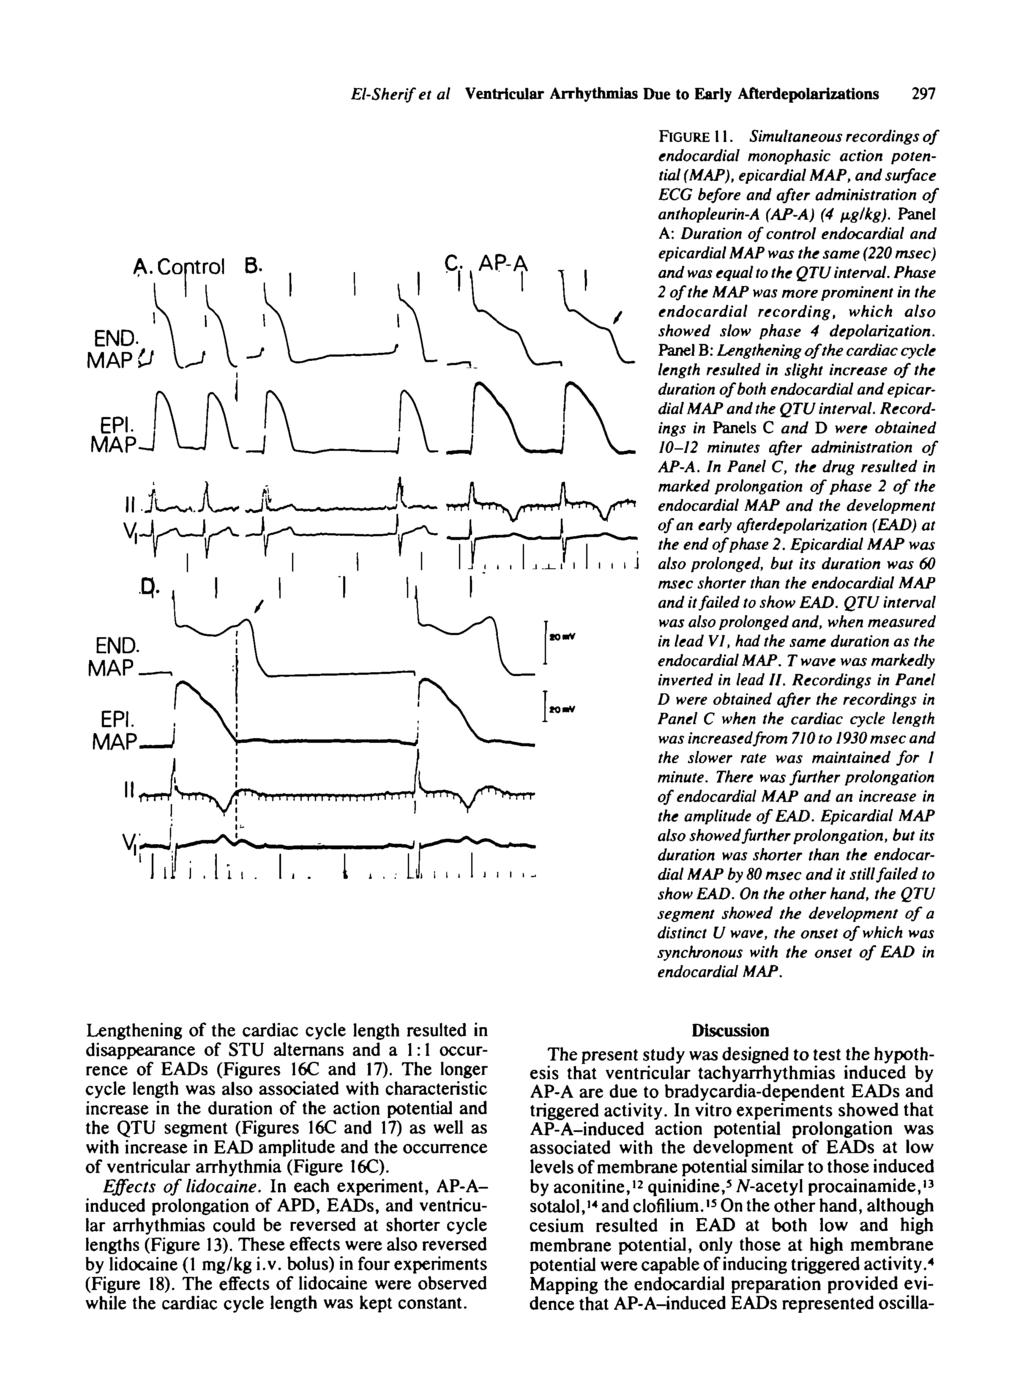 Discussion The present study was designed to test the hypothesis that ventricular tachyarrhythmias induced by AP-A are due to bradycardia-dependent EADs and triggered activity.